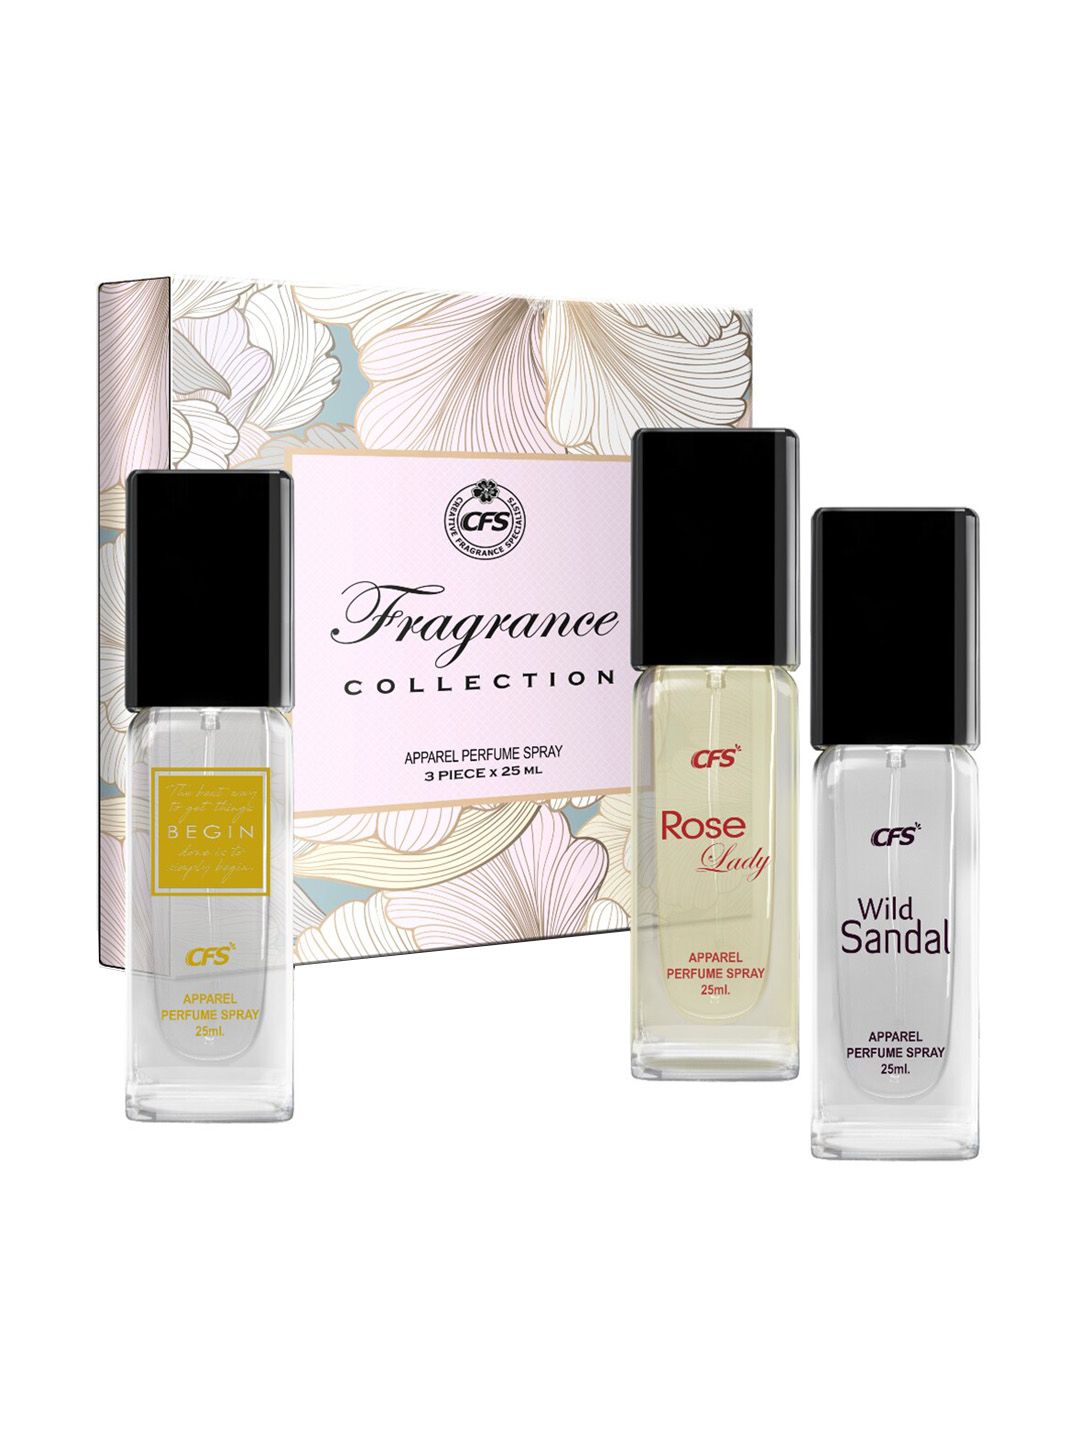 CFS Fragrance Collection Perfume Set - Begin + Rose Lady + Wild Sandal - 25 ml Each Price in India